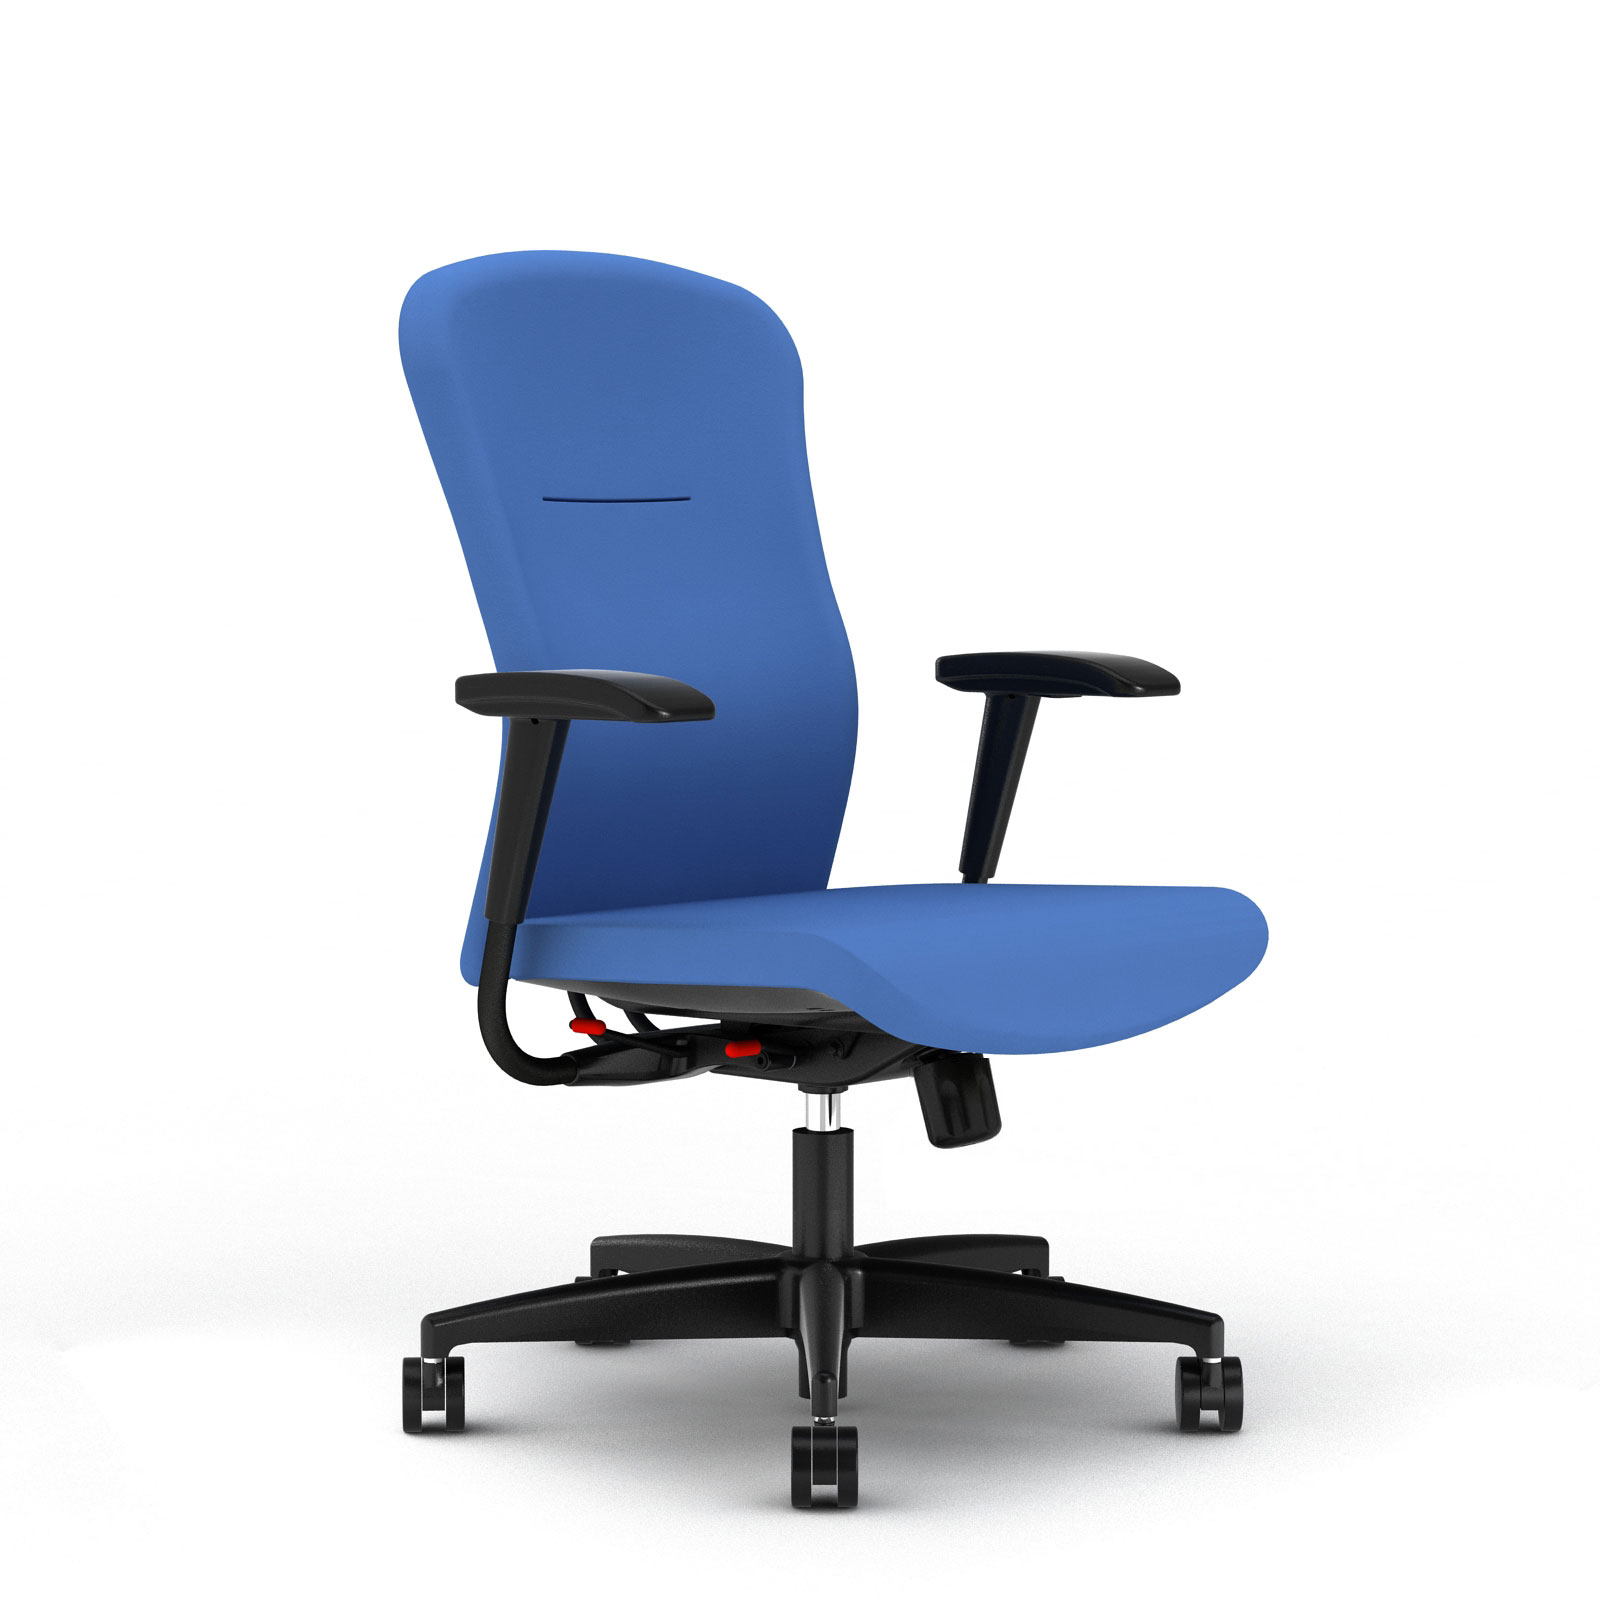 Team chair in blue fabrics and 2013 mechanism